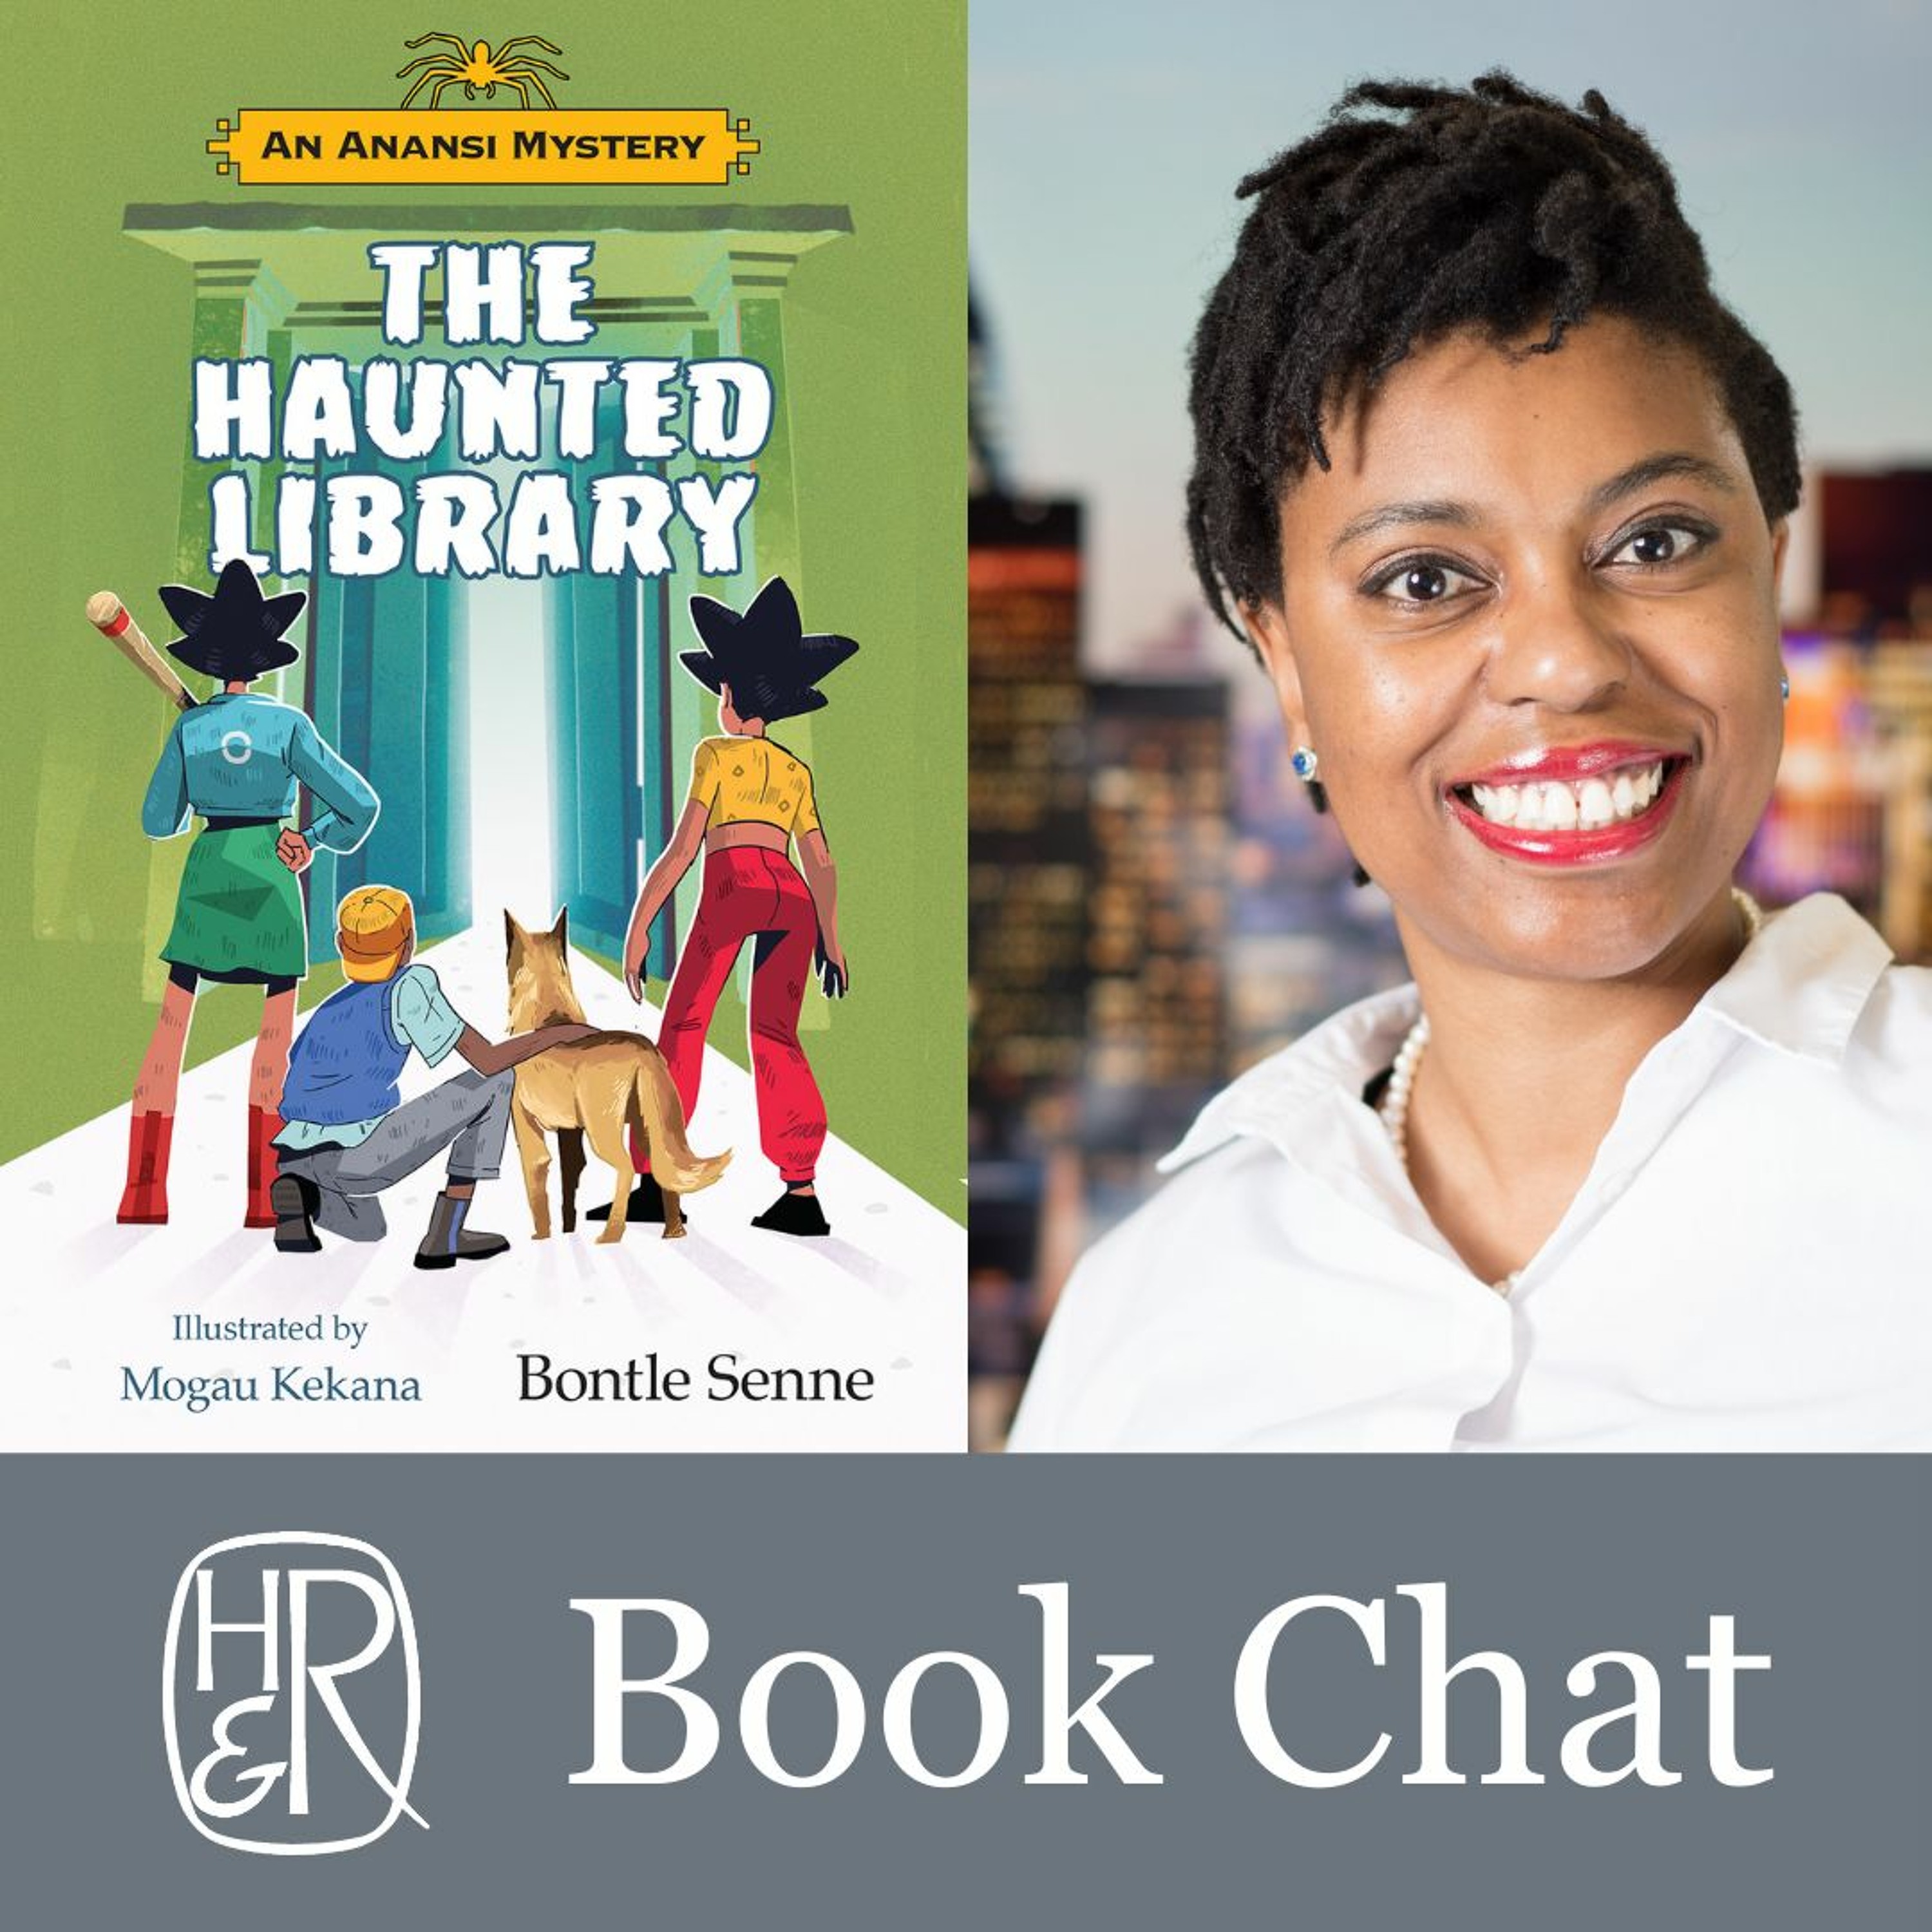 Human & Rousseau Book Chat: The Haunted Library by Bontle Senne (Illustrated by Mogau Kekana)